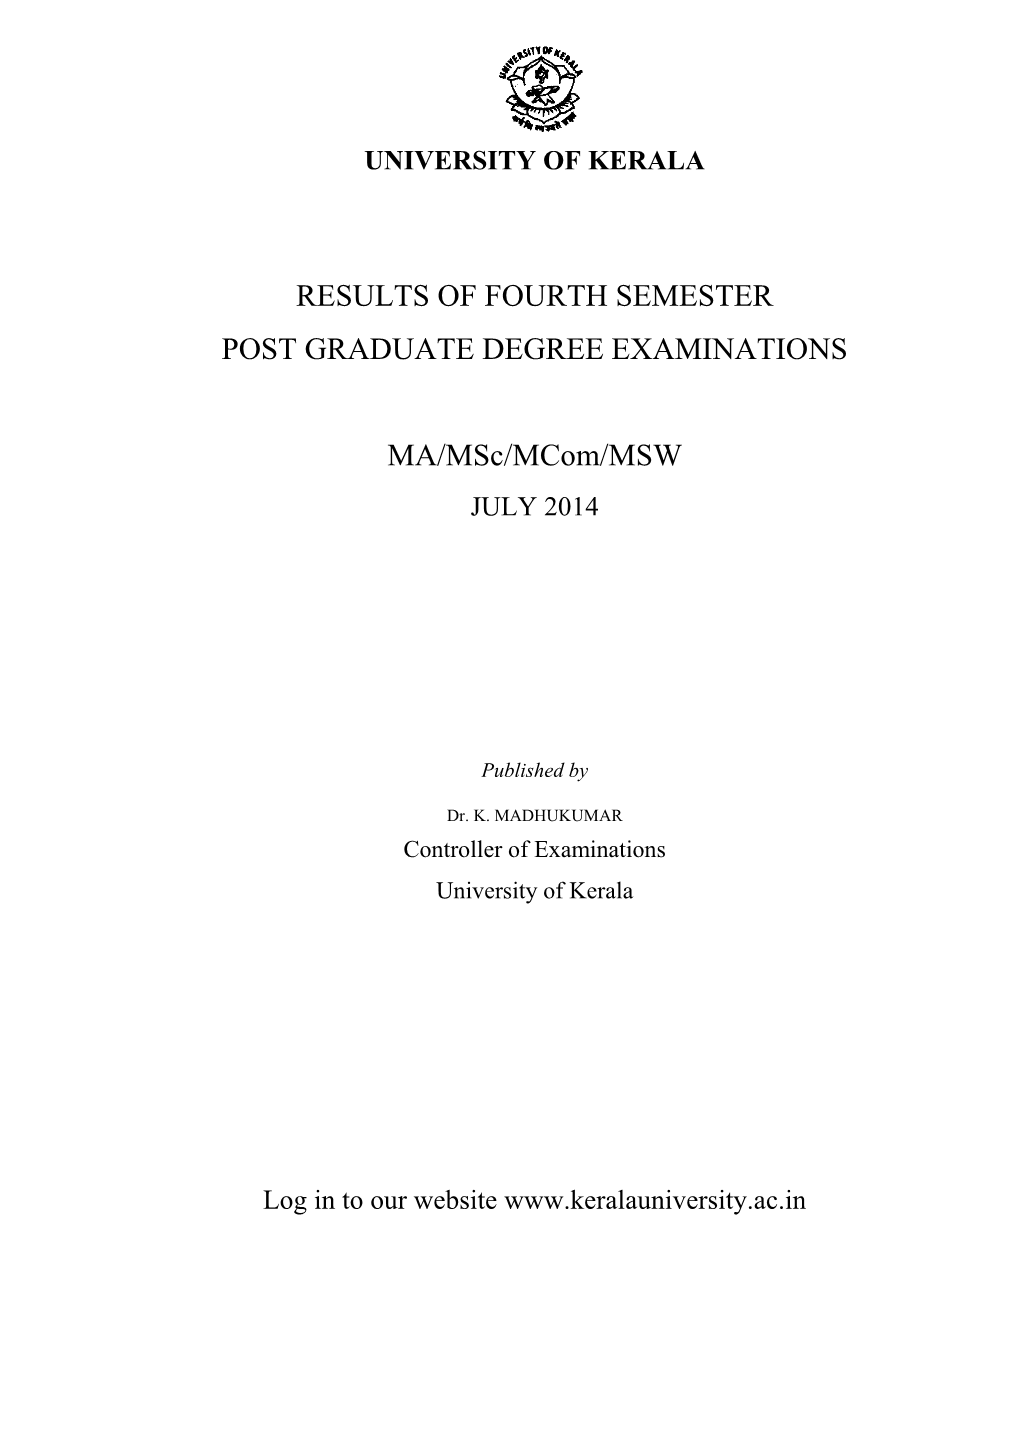 Results of Fourth Semester Post Graduate Degree Examinations